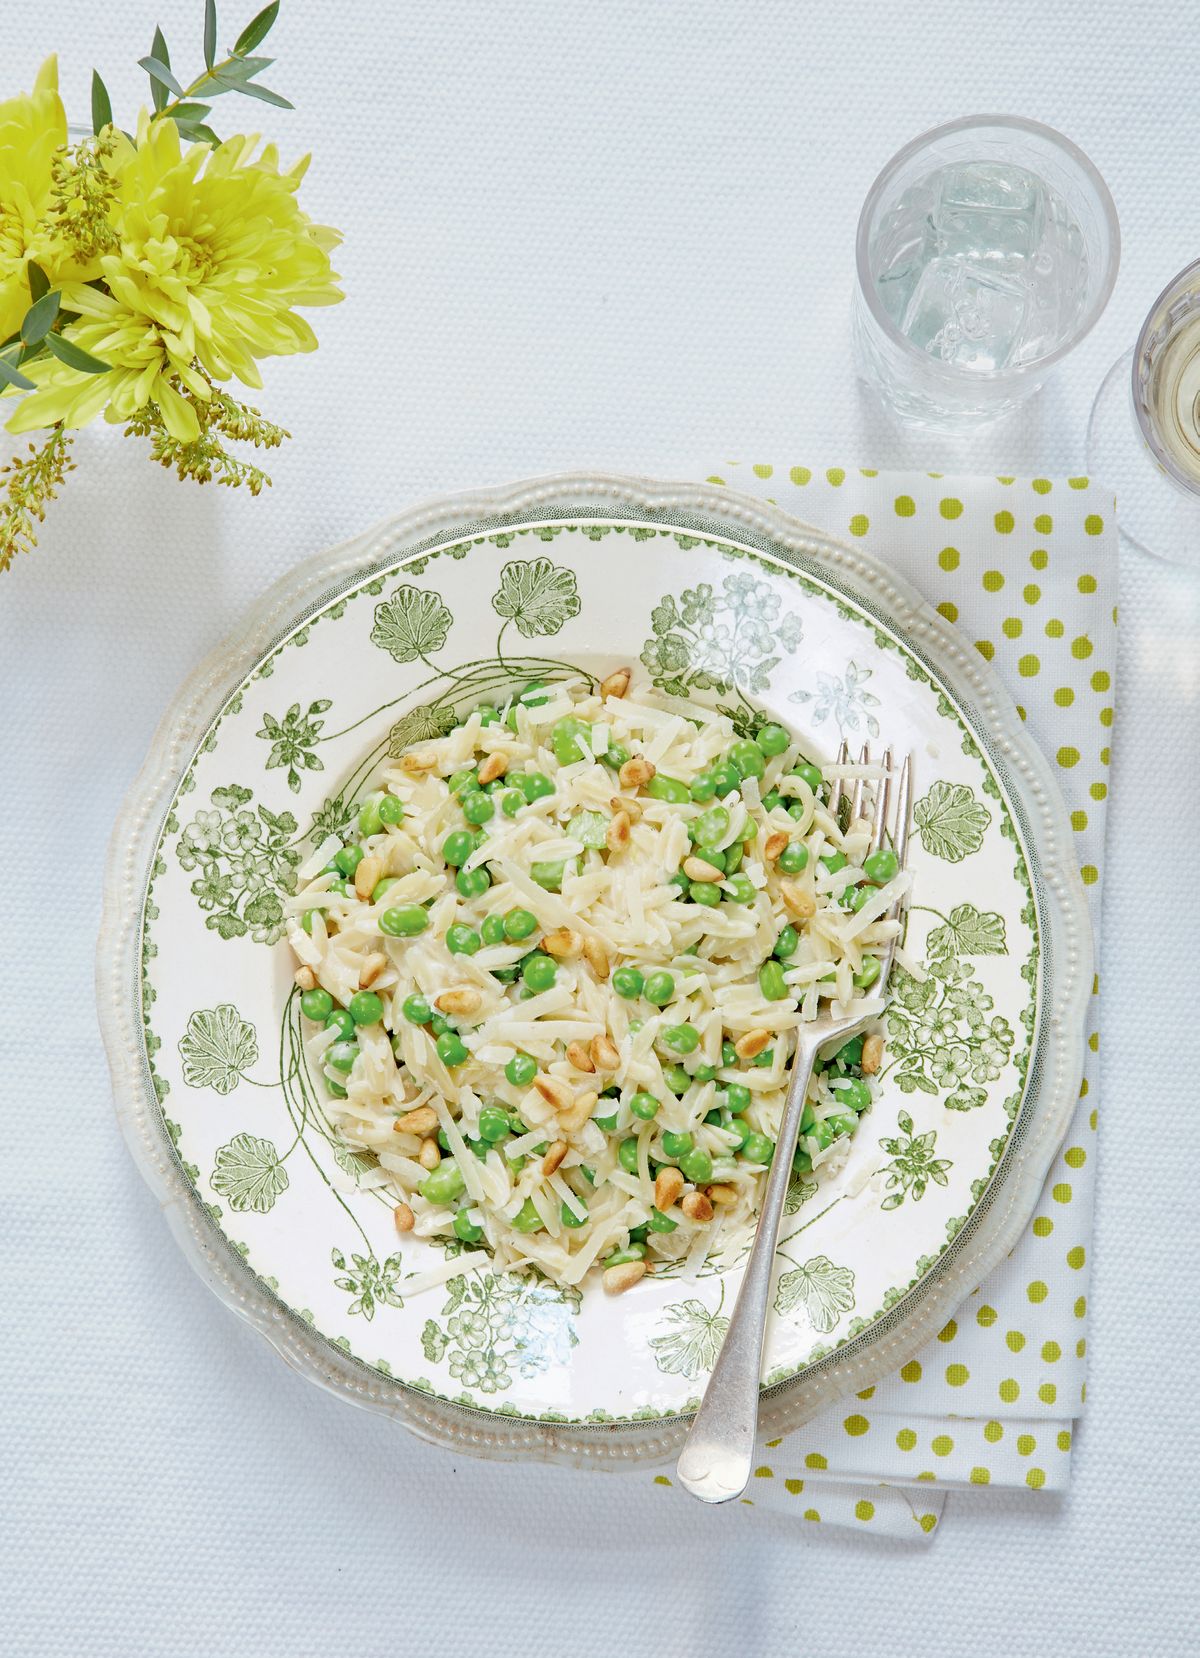 Mary Berry’s Orzo with Broad Beans, Peas, Lemon, and Thyme